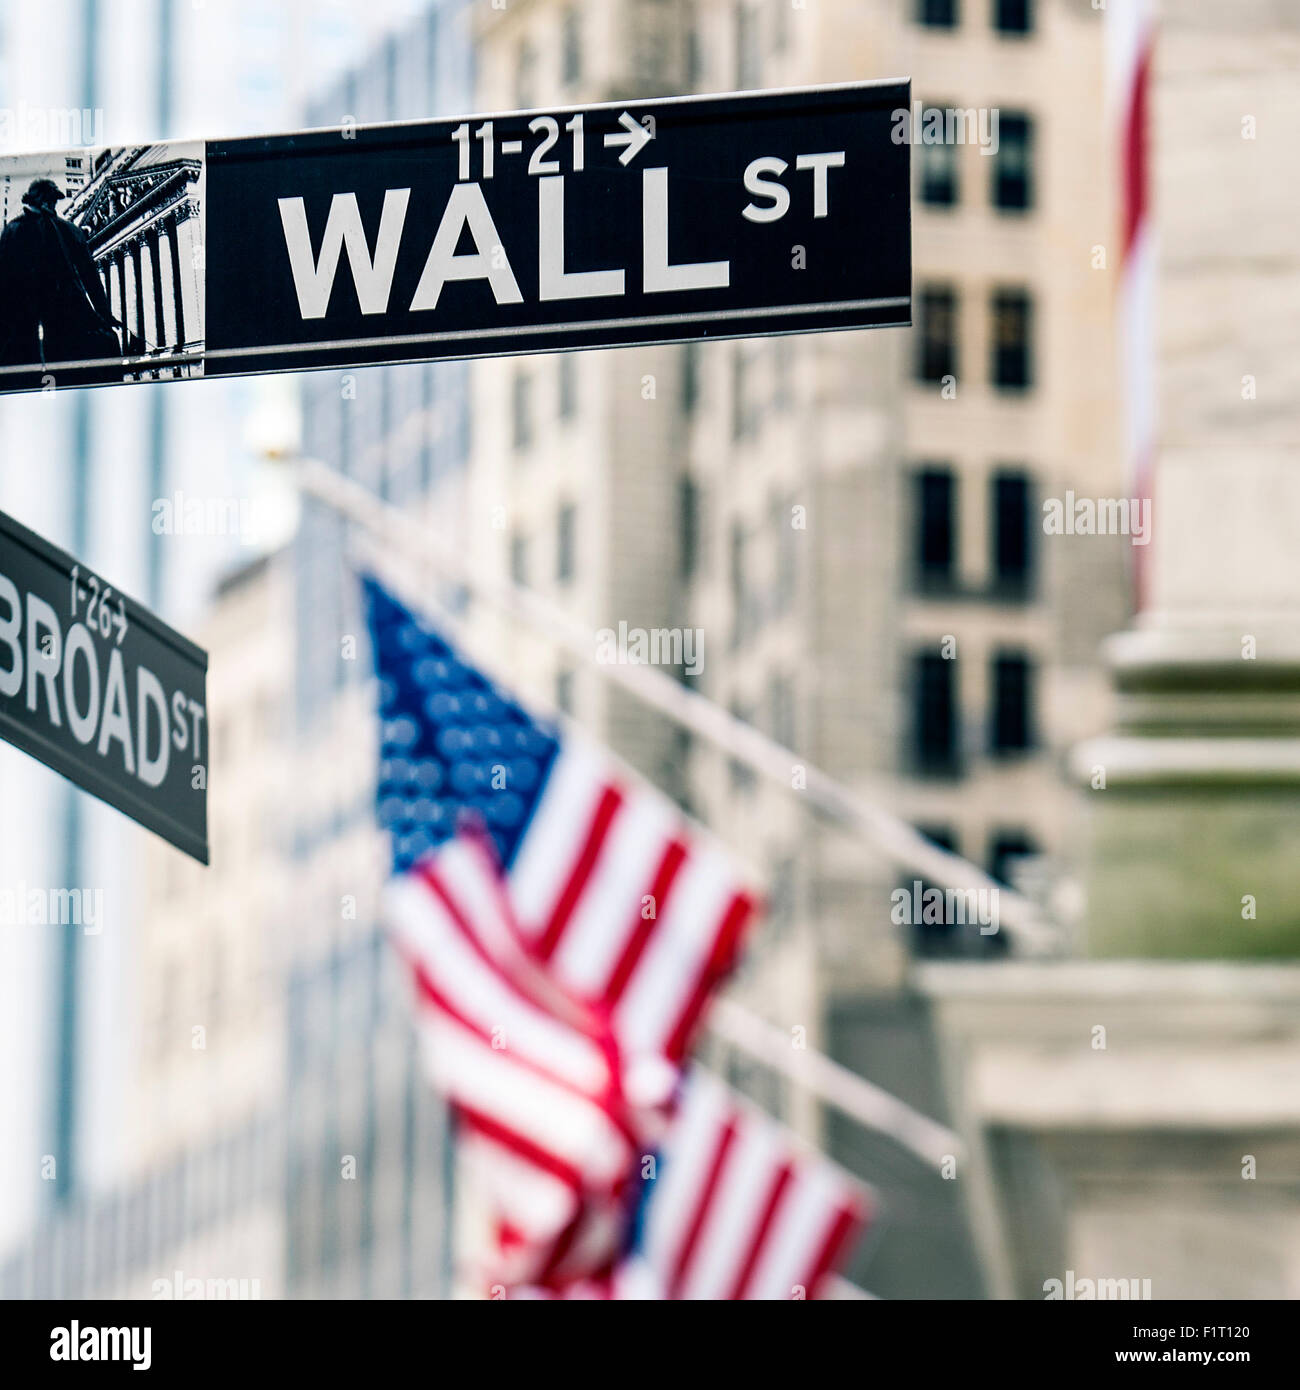 View of Wall street sign in New York with New York Stock Exchange background Stock Photo